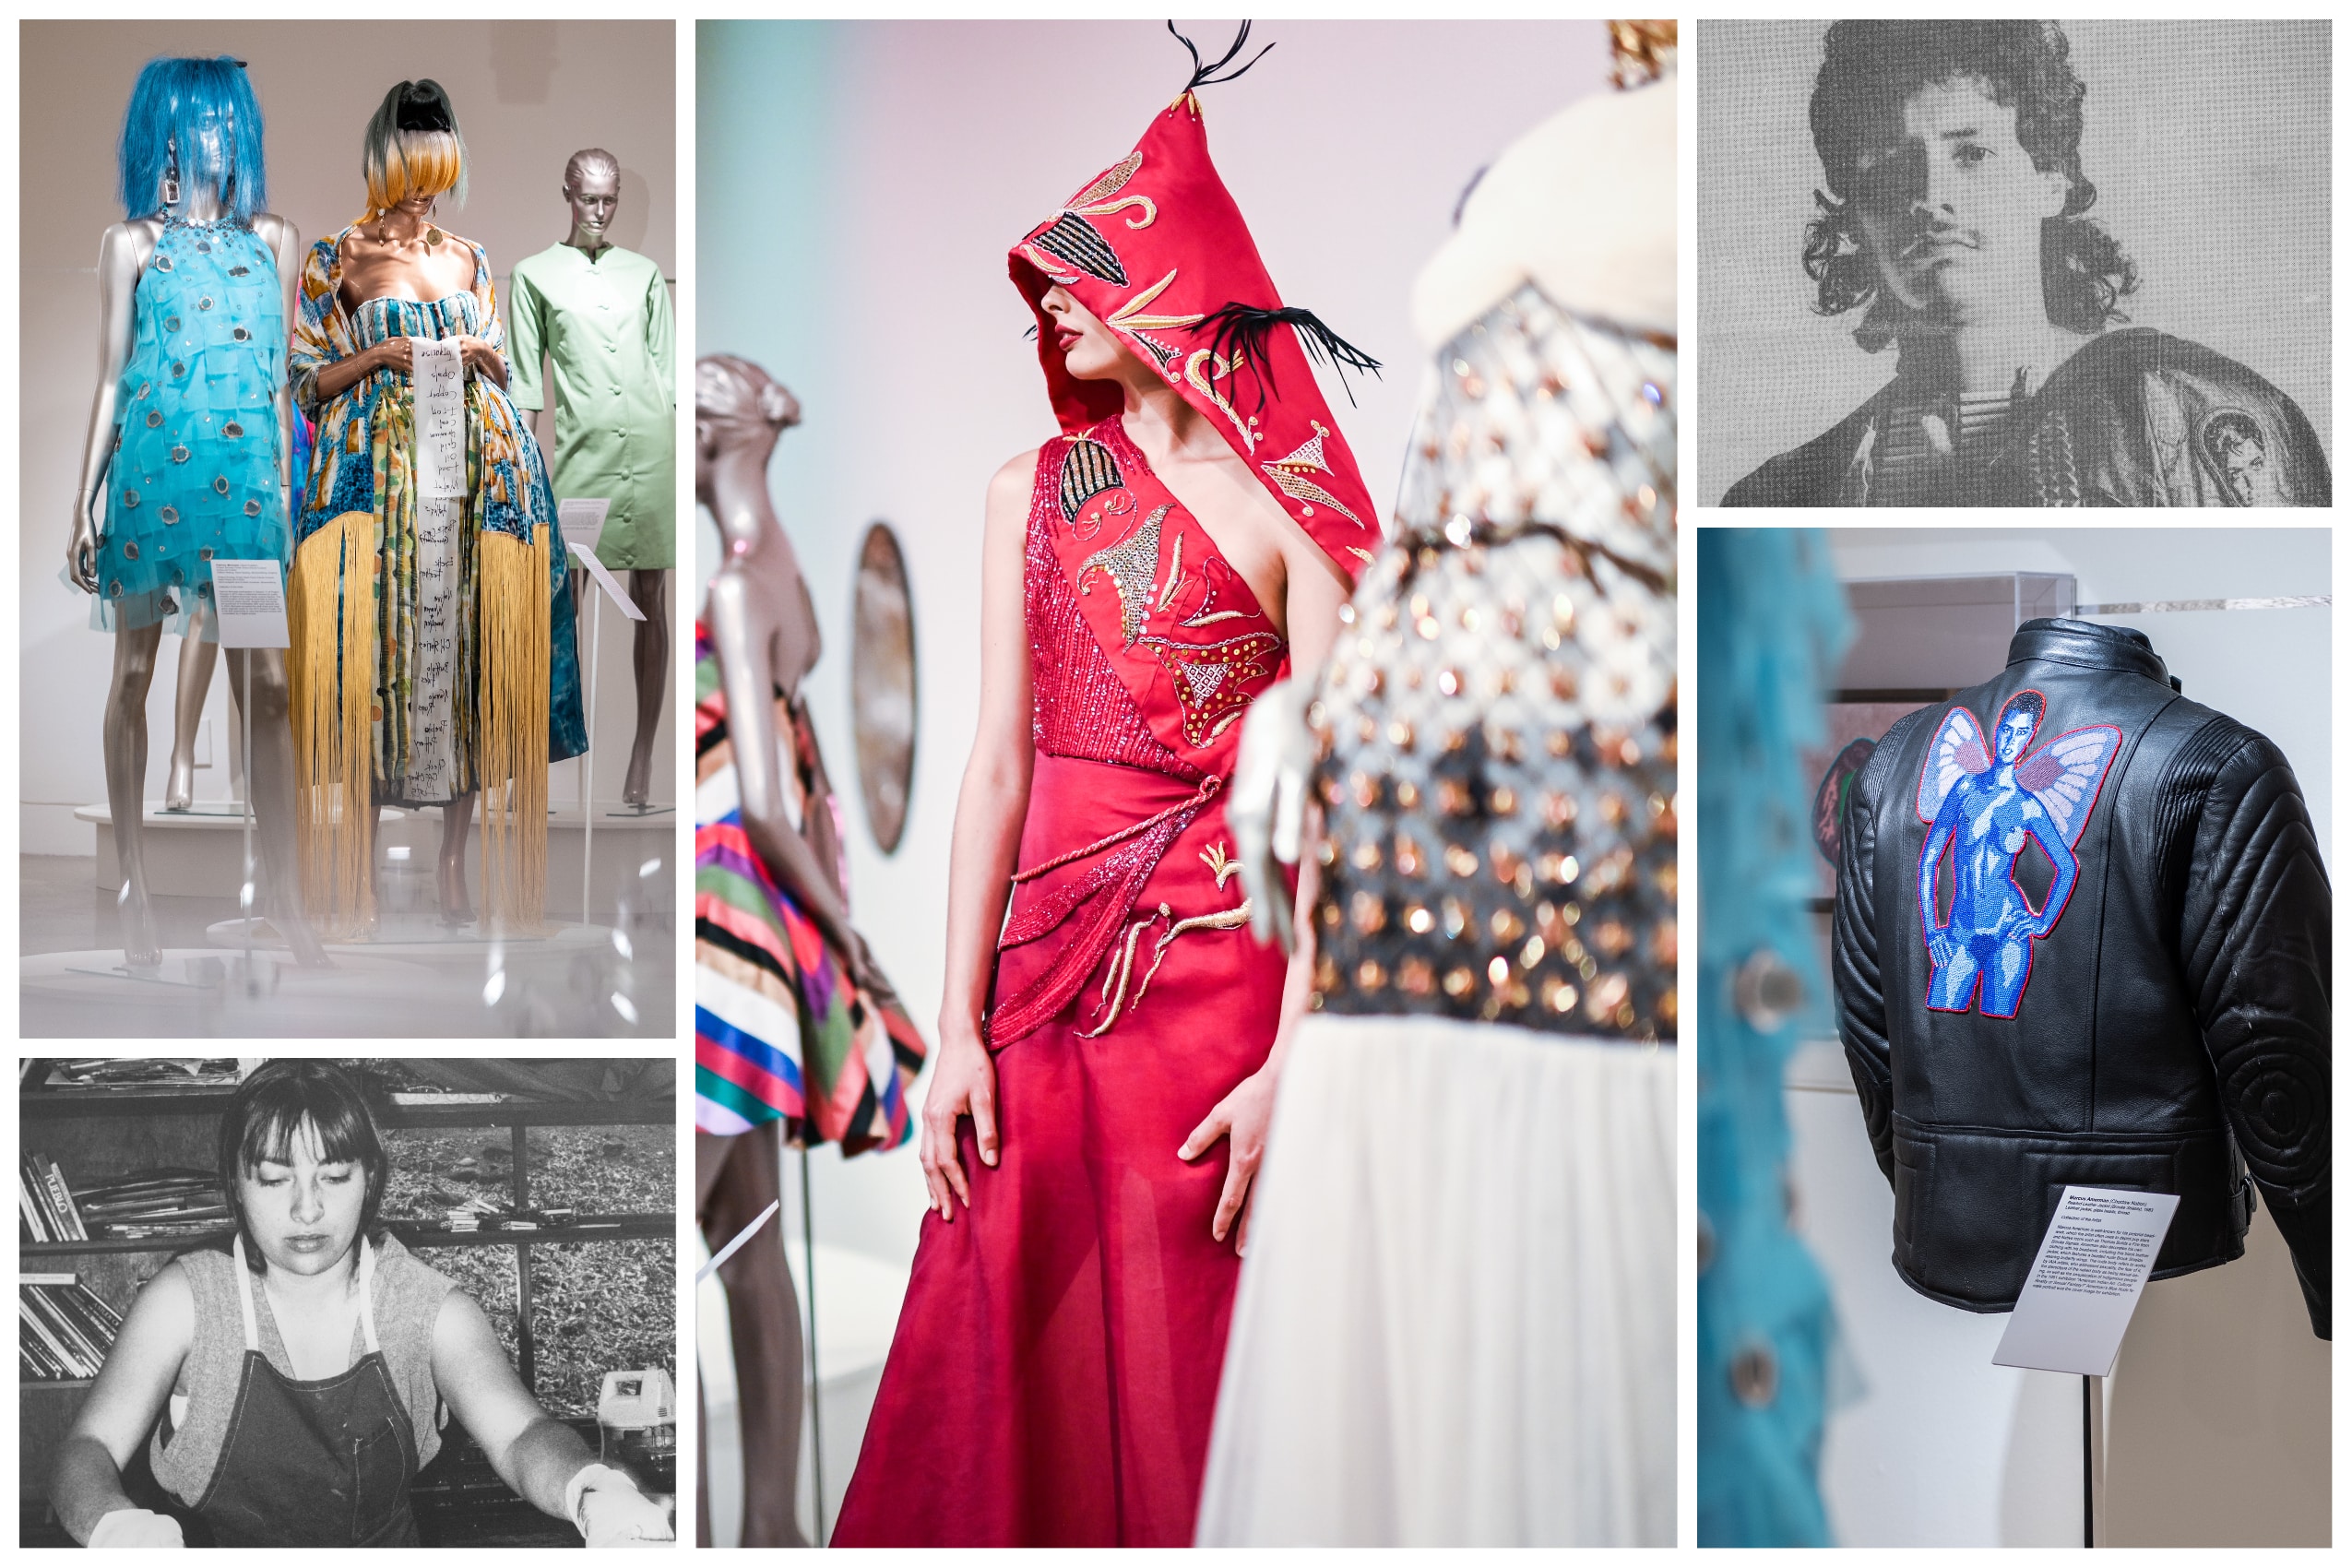 Image Credit (clockwise from upper left)­: Installation view of Art of Indigenous Fashion with Project Runway Finale Dress and Colonial Dress by Patricia Michaels in foreground, photograph by Nicole Lawe (Karuk); installation view with The Red Collection-Look No. 2 by Orlando Dugi at center, photograph by Nicole Lawe (Karuk); model in Marcus Amerman beaded leather jacket c. 1980s, photograph courtesy IAIA Archives; installation view of Beaded Leather Jacket (Brooke Shields), photograph by Nicole Lawe (Karuk); Patricia Michaels c. 1980s, photograph courtesy IAIA Archives. All pictured designs are on view in the Art of Indigenous Fashion exhibition at the IAIA Museum of Contemporary Native Arts